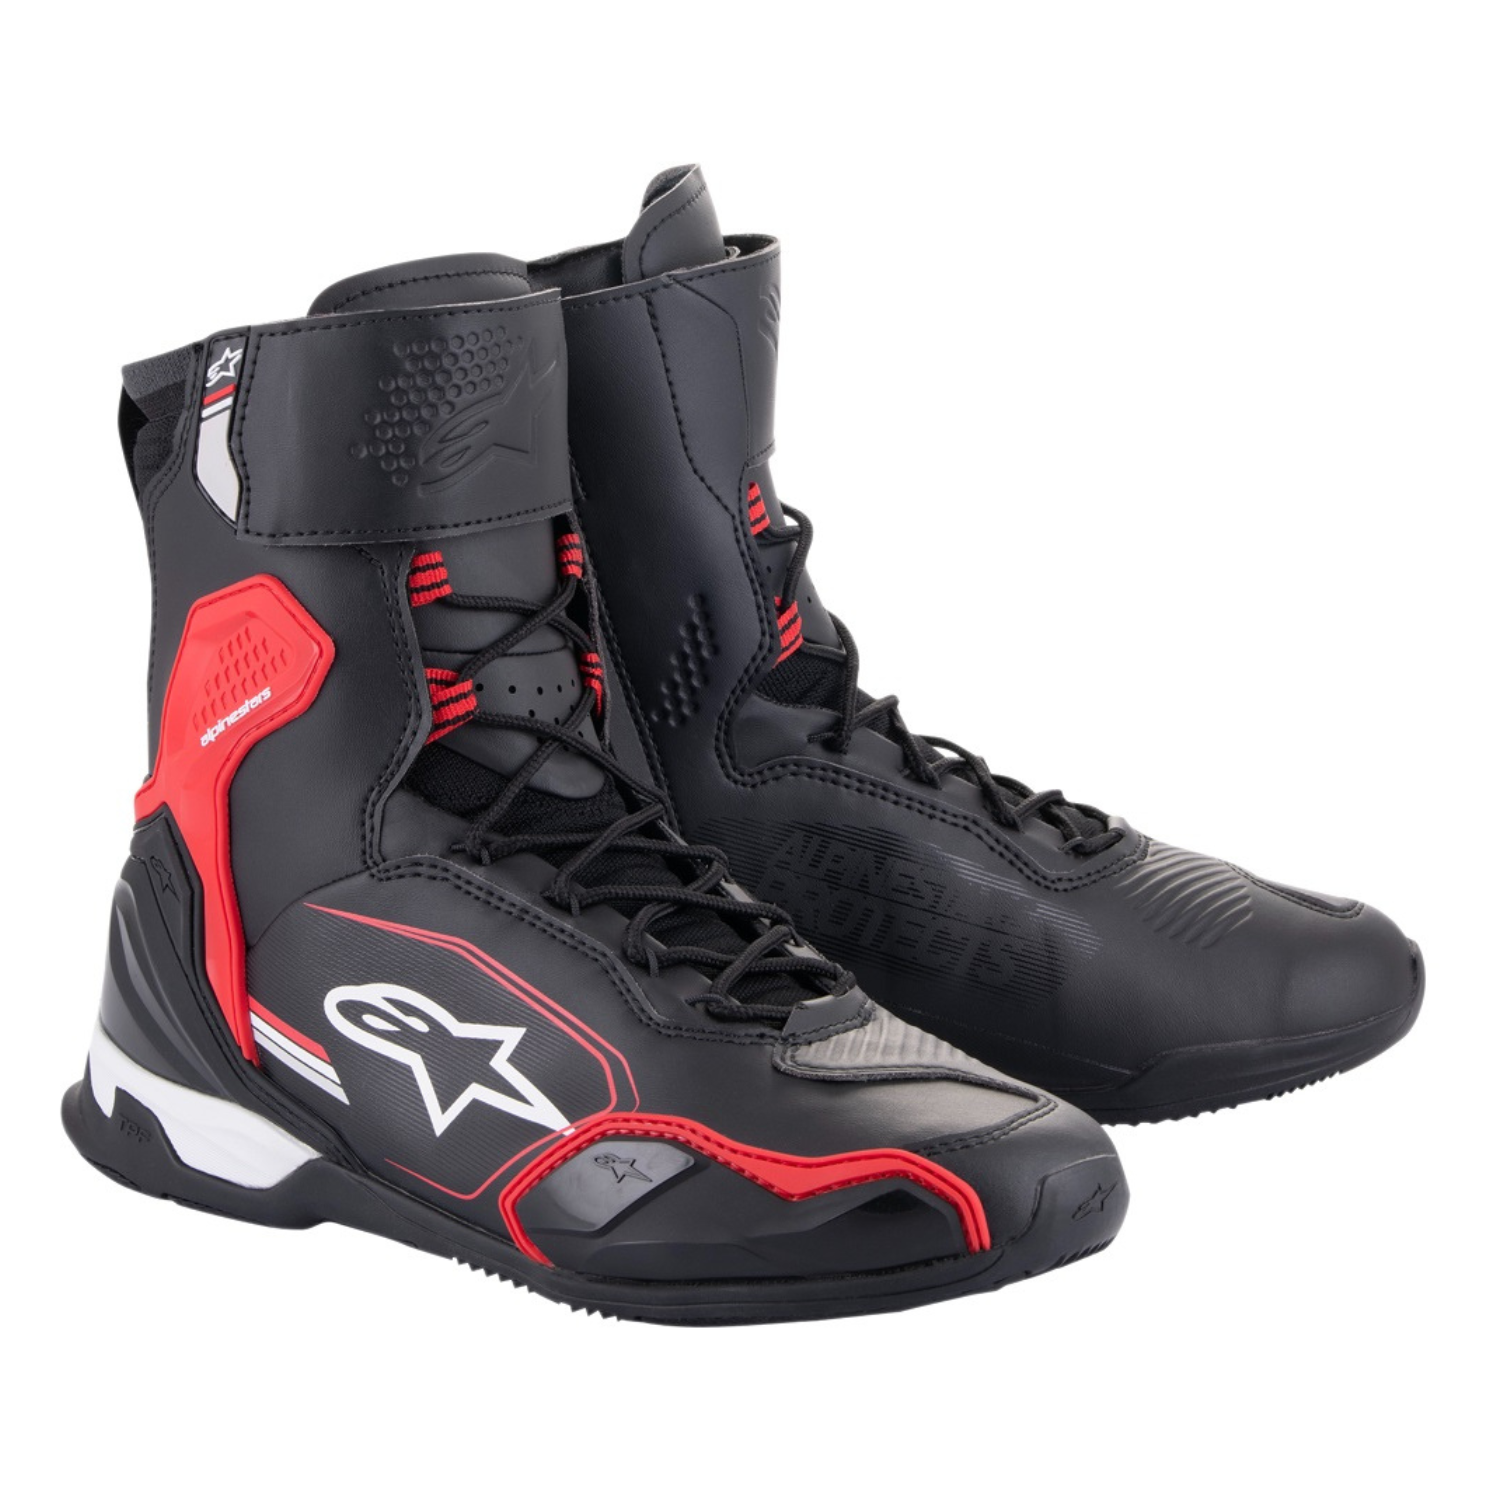 Image of EU Alpinestars Superfaster Shoes Black Bright Red White Taille US 95